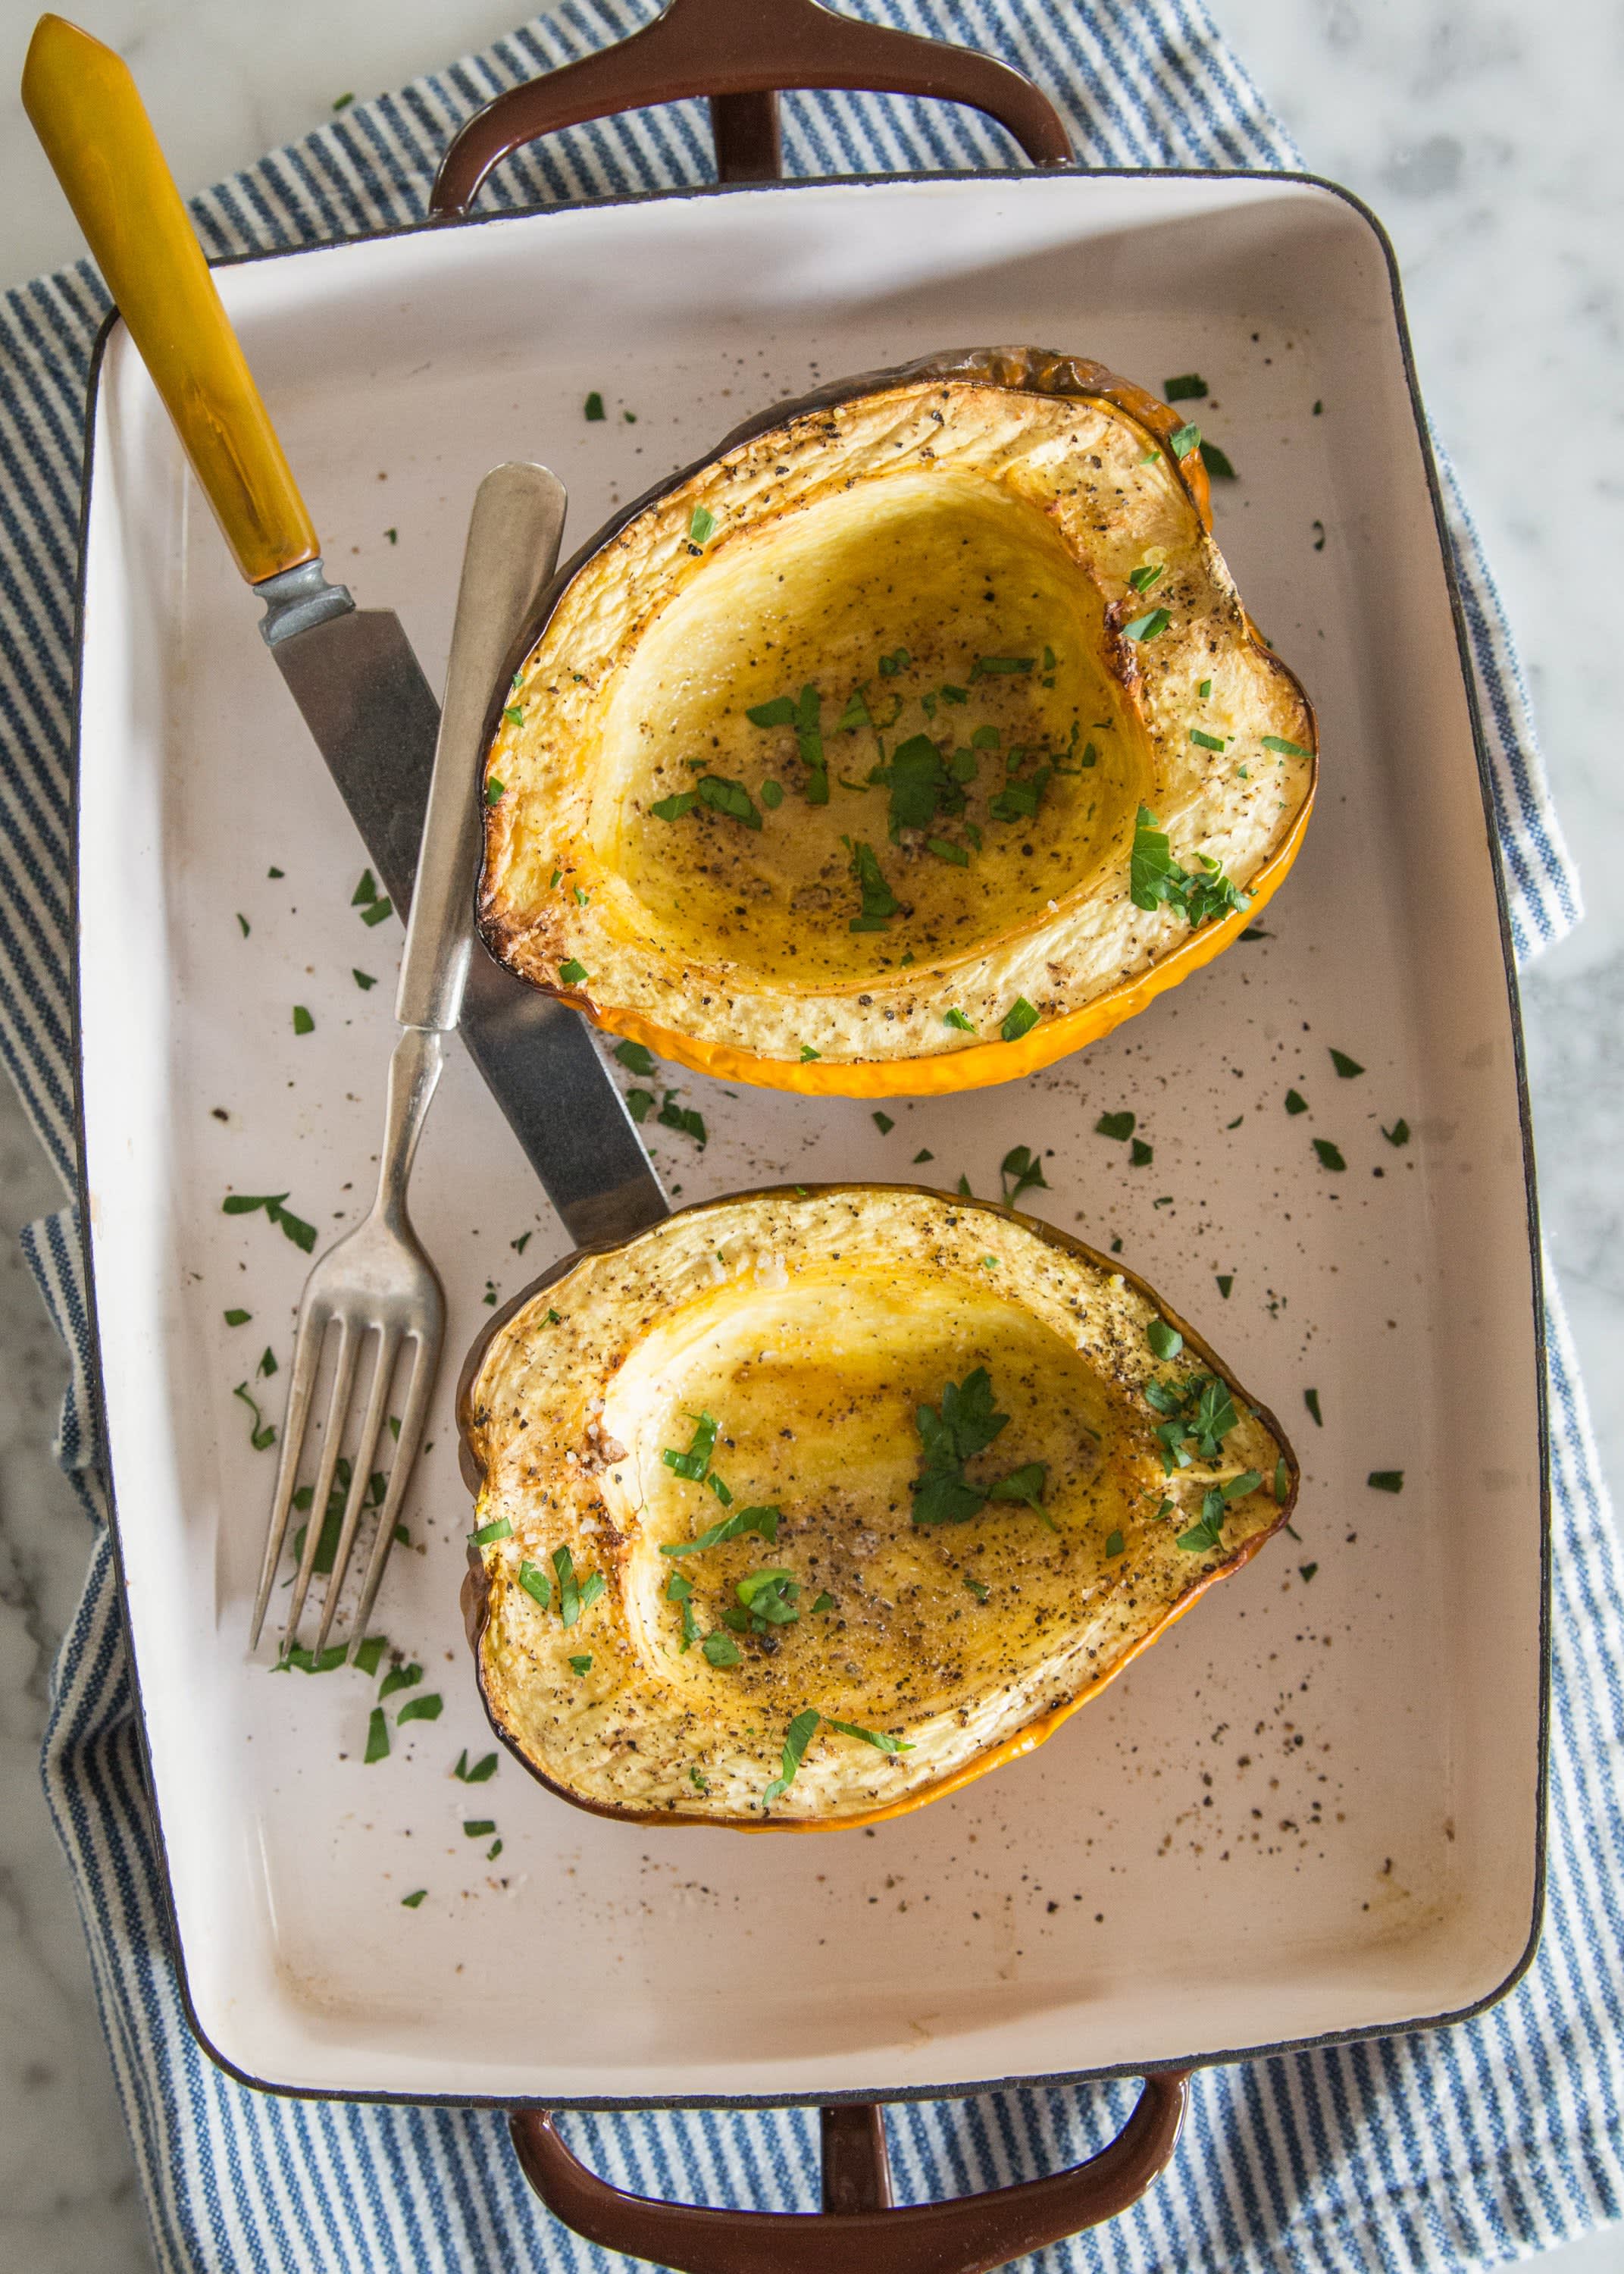 acorn squash baked in oven